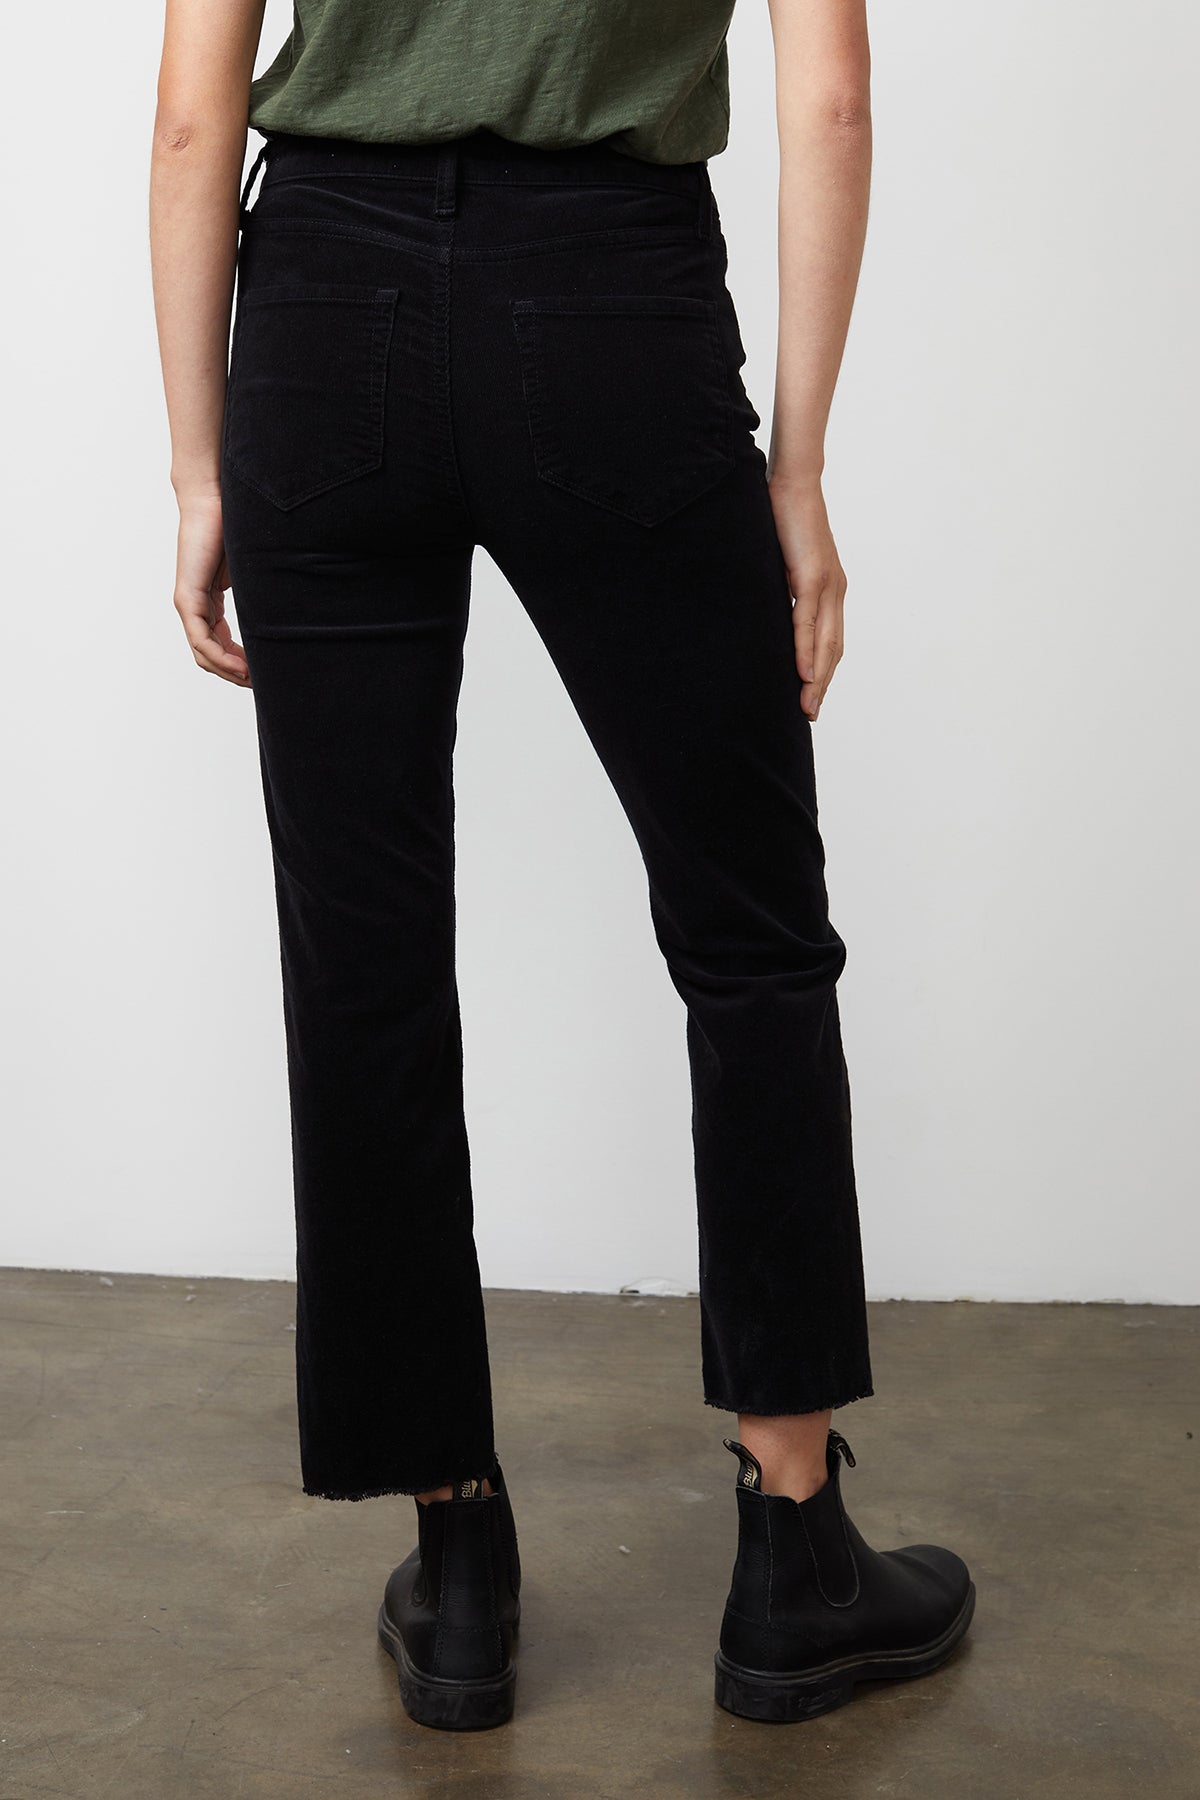 The back view of a person wearing Velvet by Graham & Spencer's CANDACE CORDUROY HIGH RISE CROP JEANS in a fall-inspired color scheme, with cropped cuffs.-14889566208193